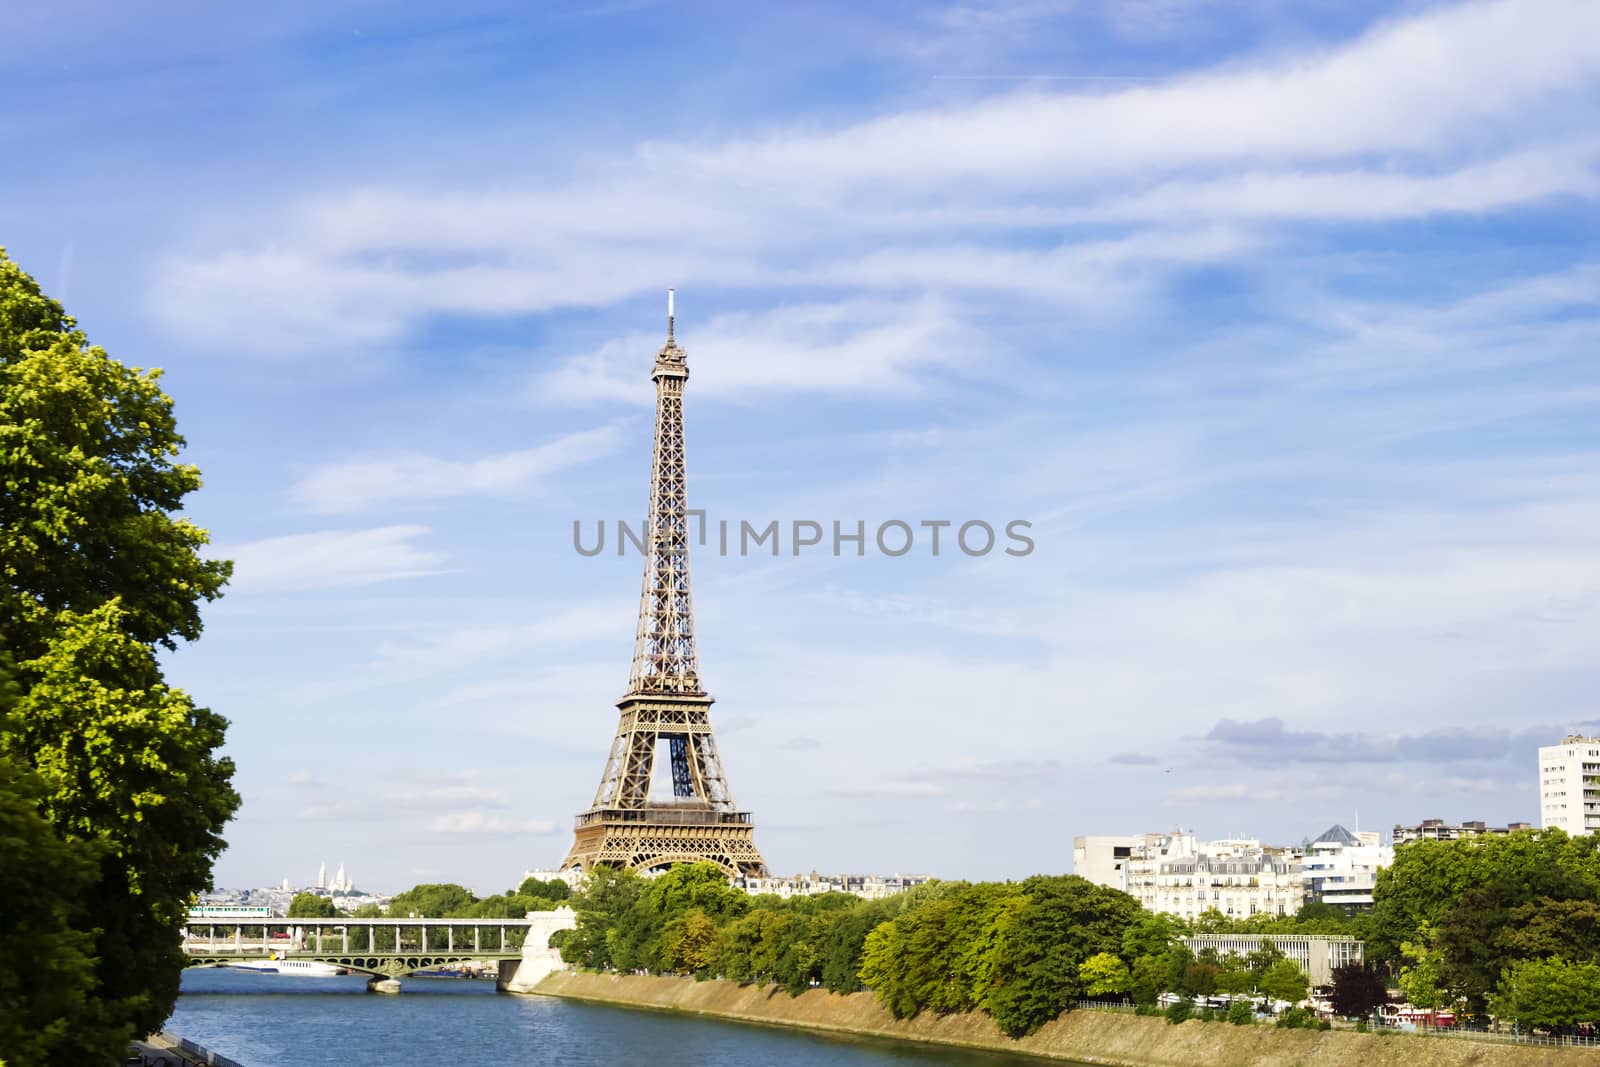 Eiffel Towerfrom the view over Siene, Paris, France by Tetyana